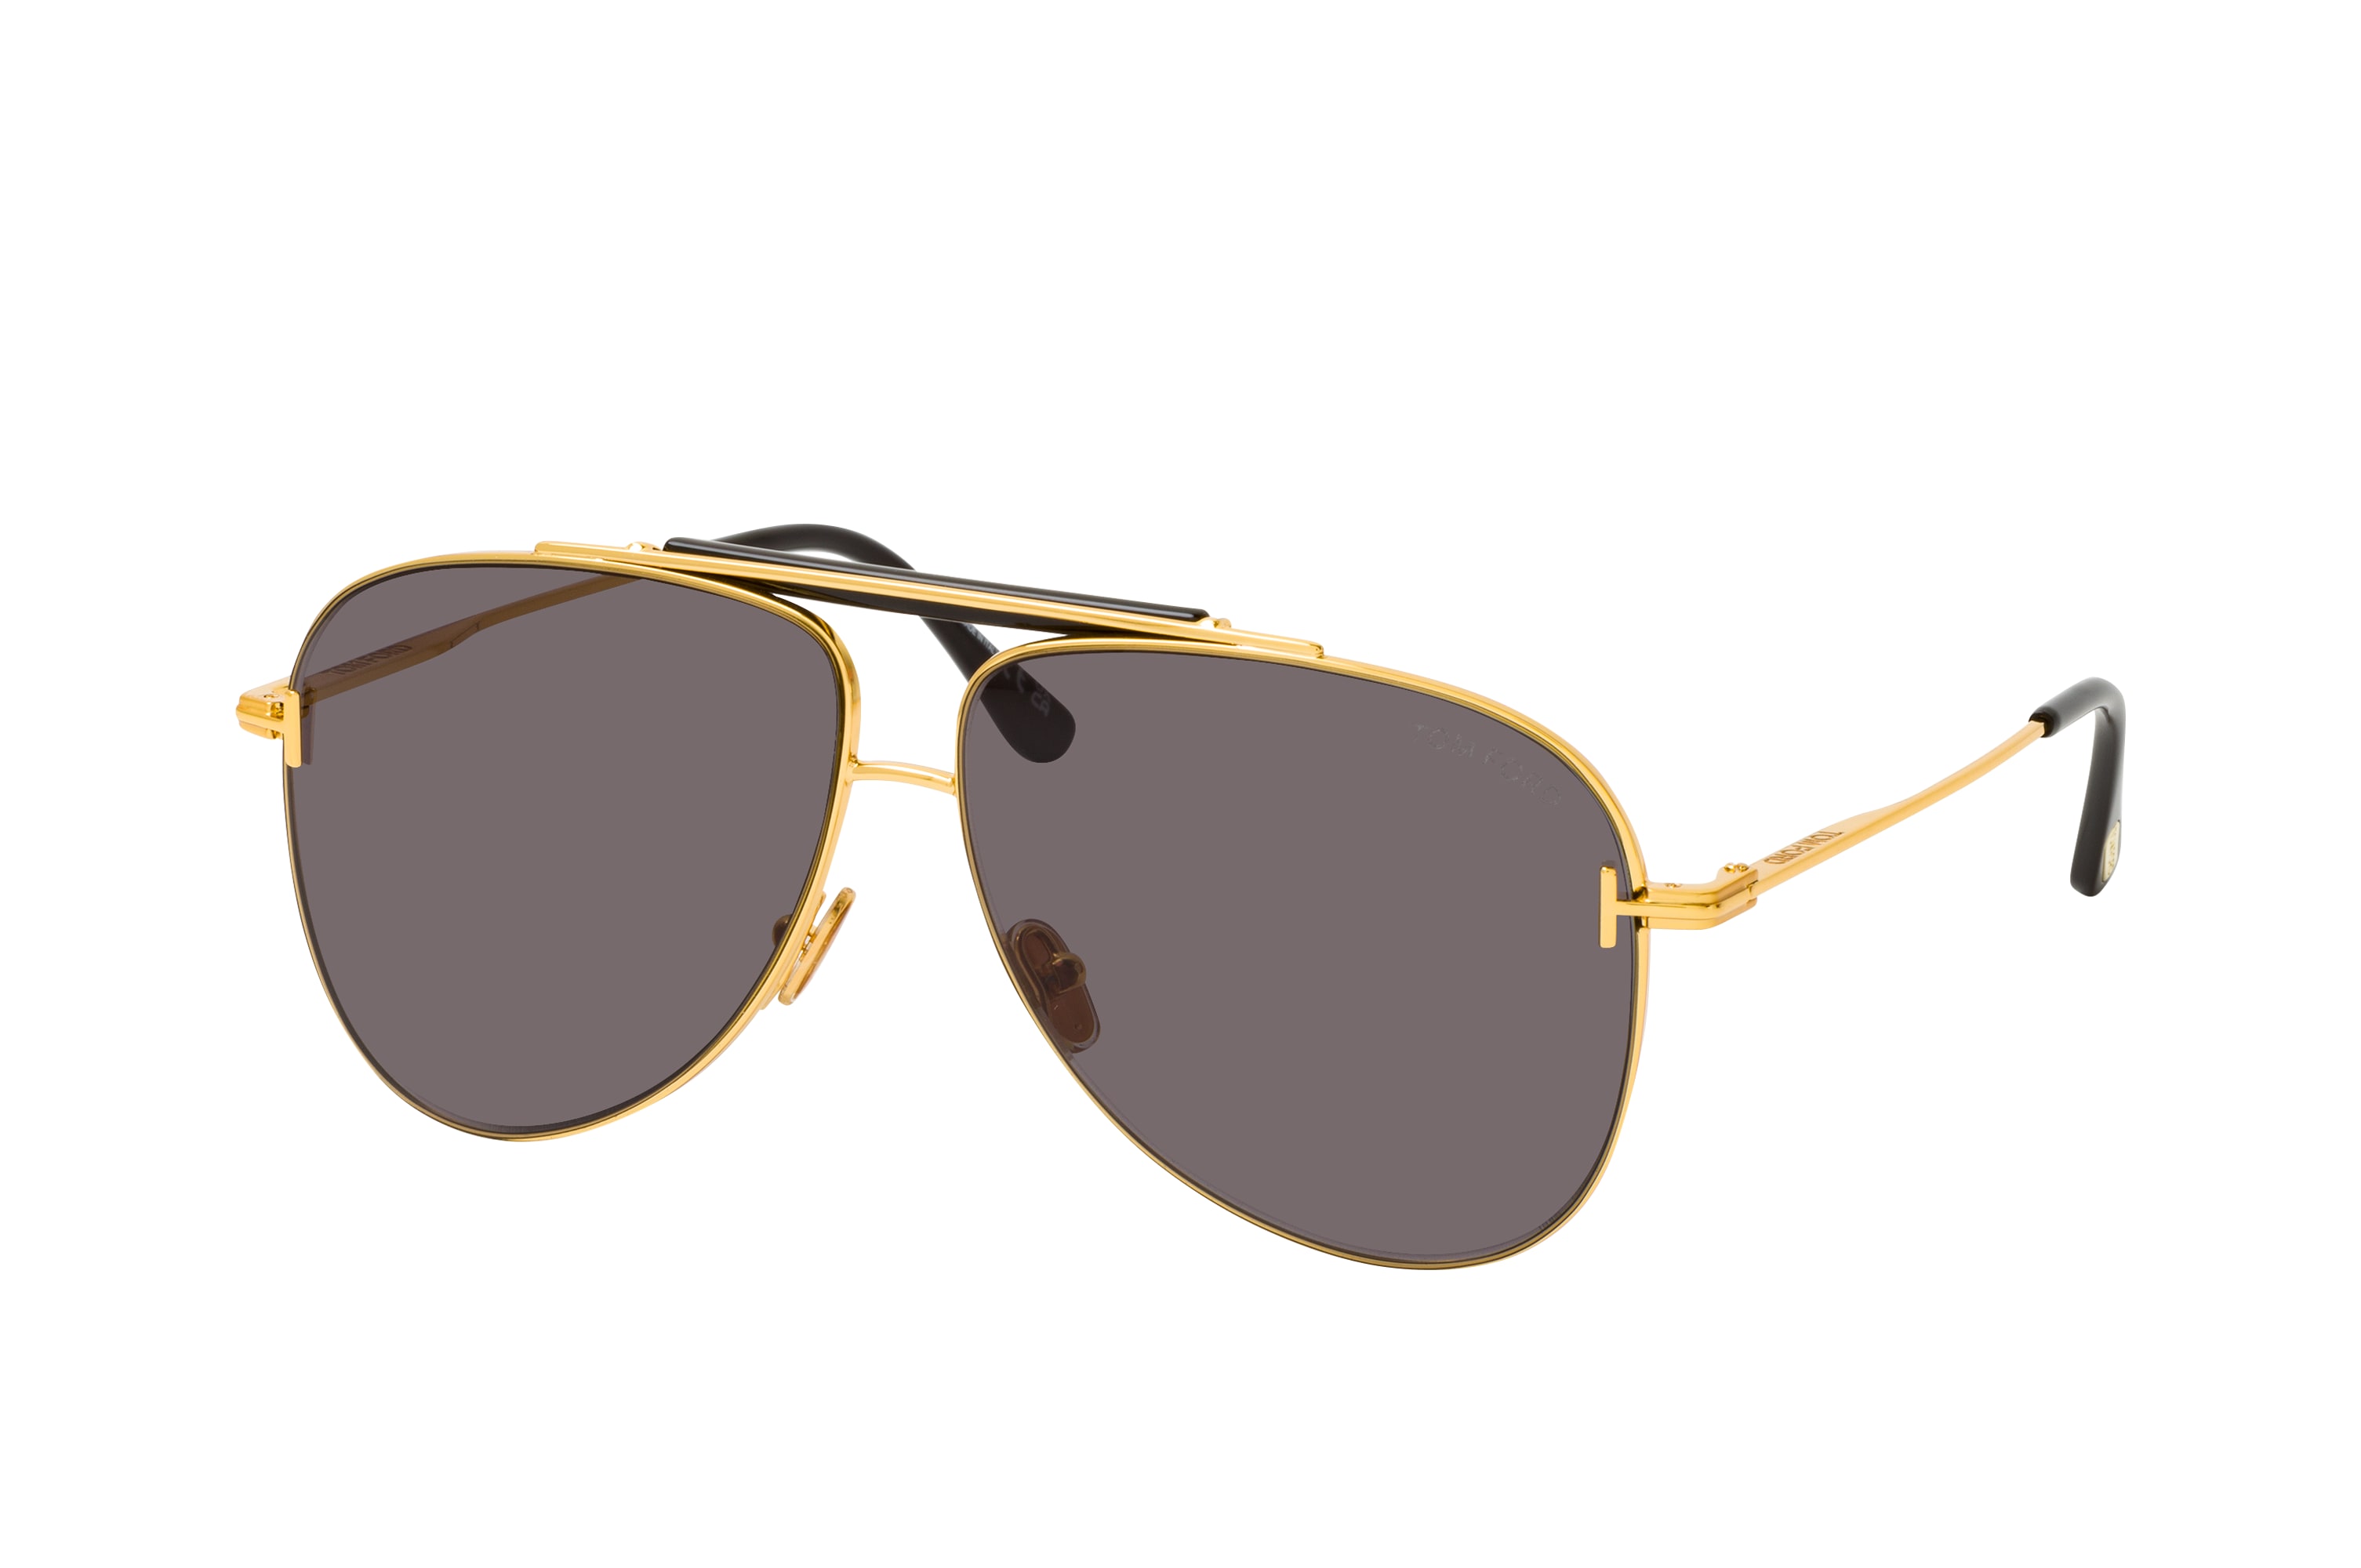 Buy Tom Ford FT 1018 30A Sunglasses